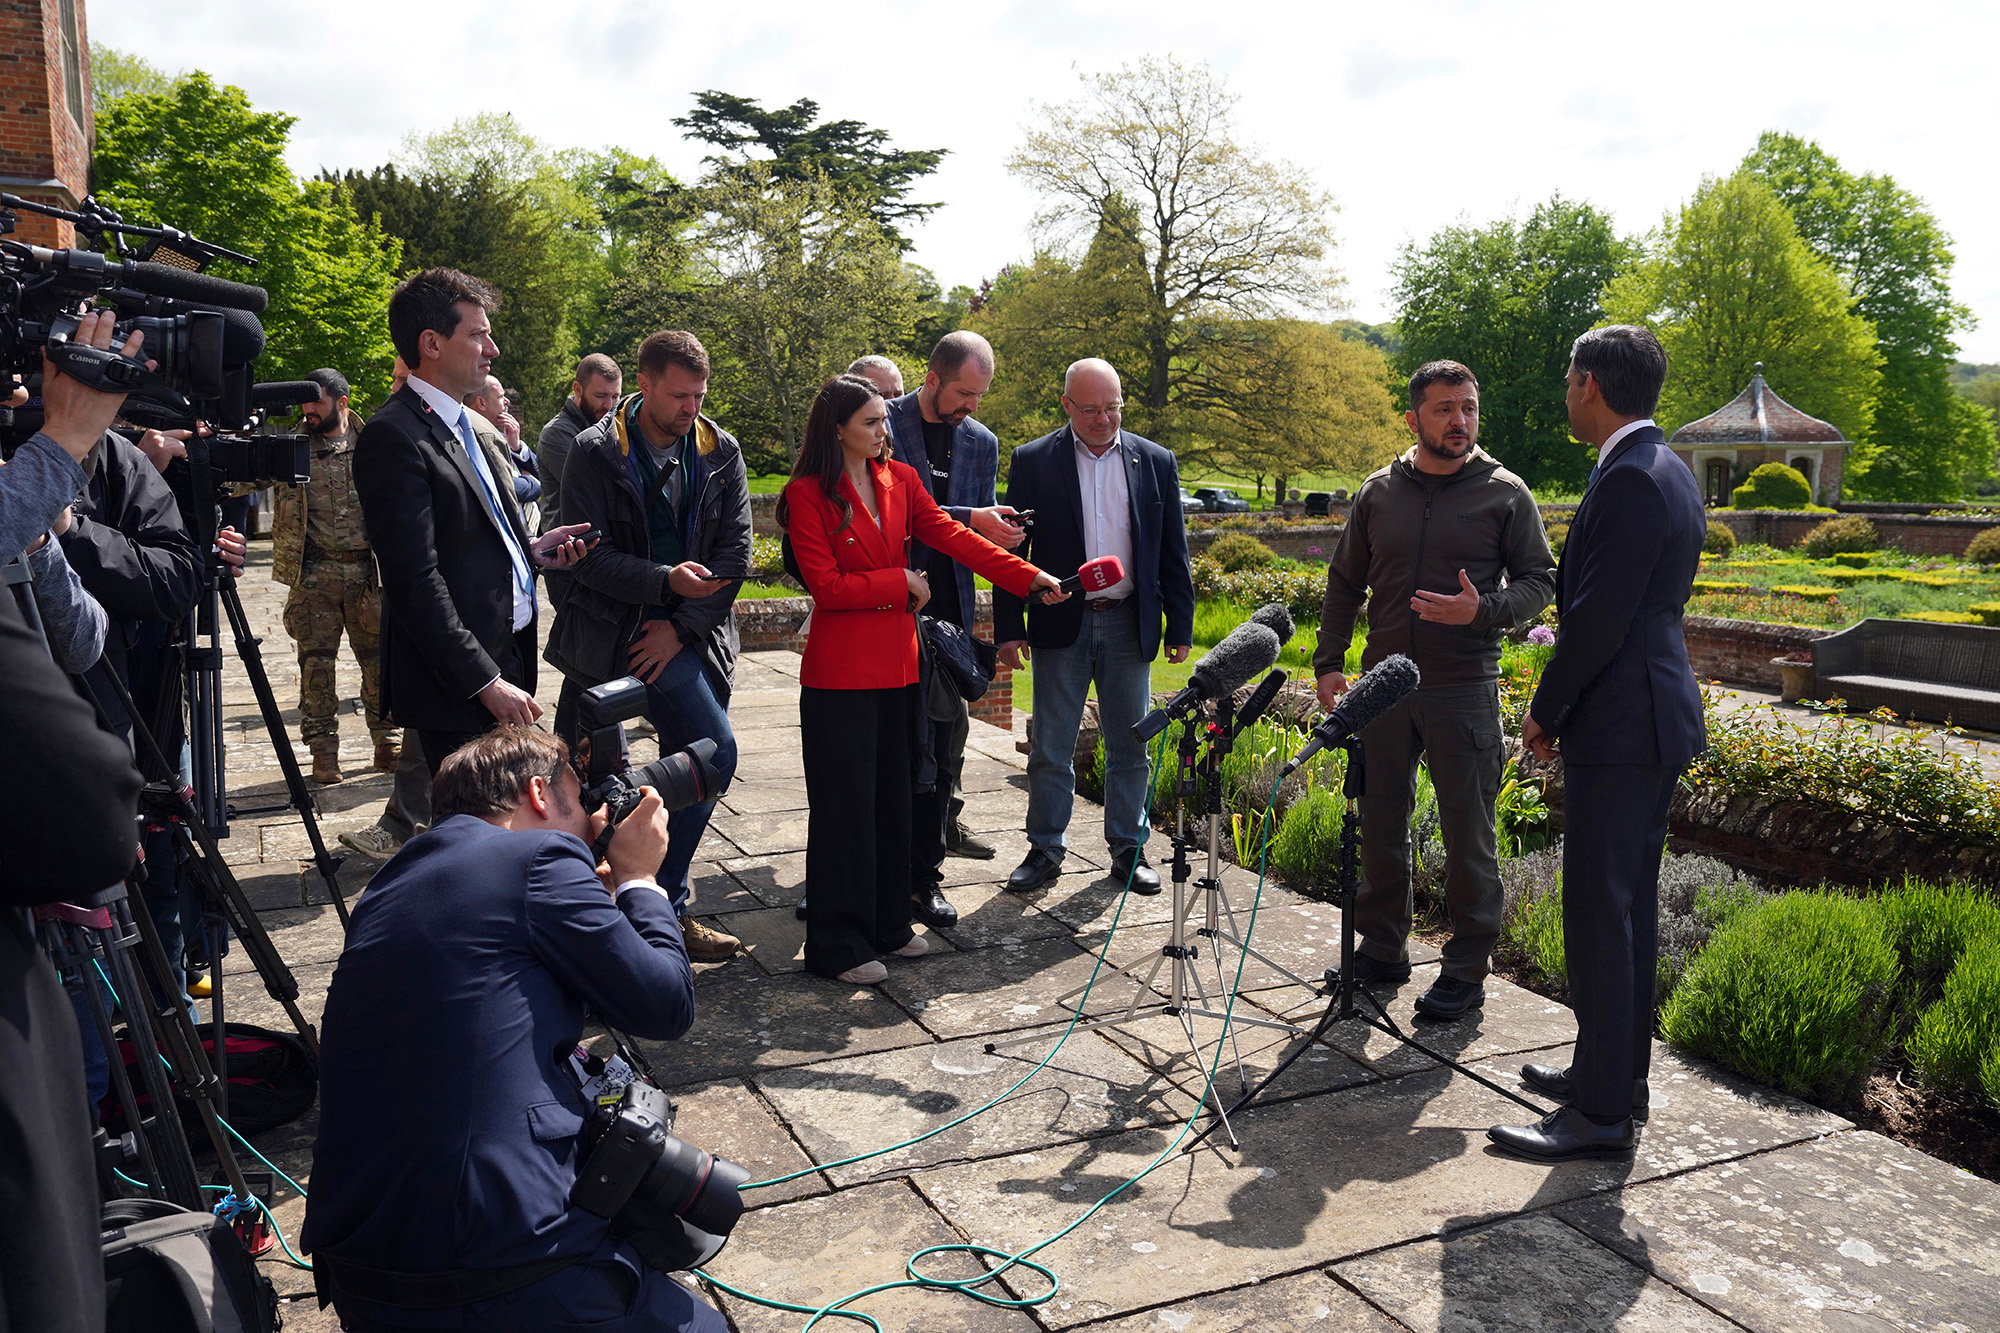 Britain's Prime Minister, Rishi Sunak, right, and Ukraine's President, Volodymyr Zelensky, speak during a press conference in the garden at Chequers on May 15, in Aylesbury, England. 